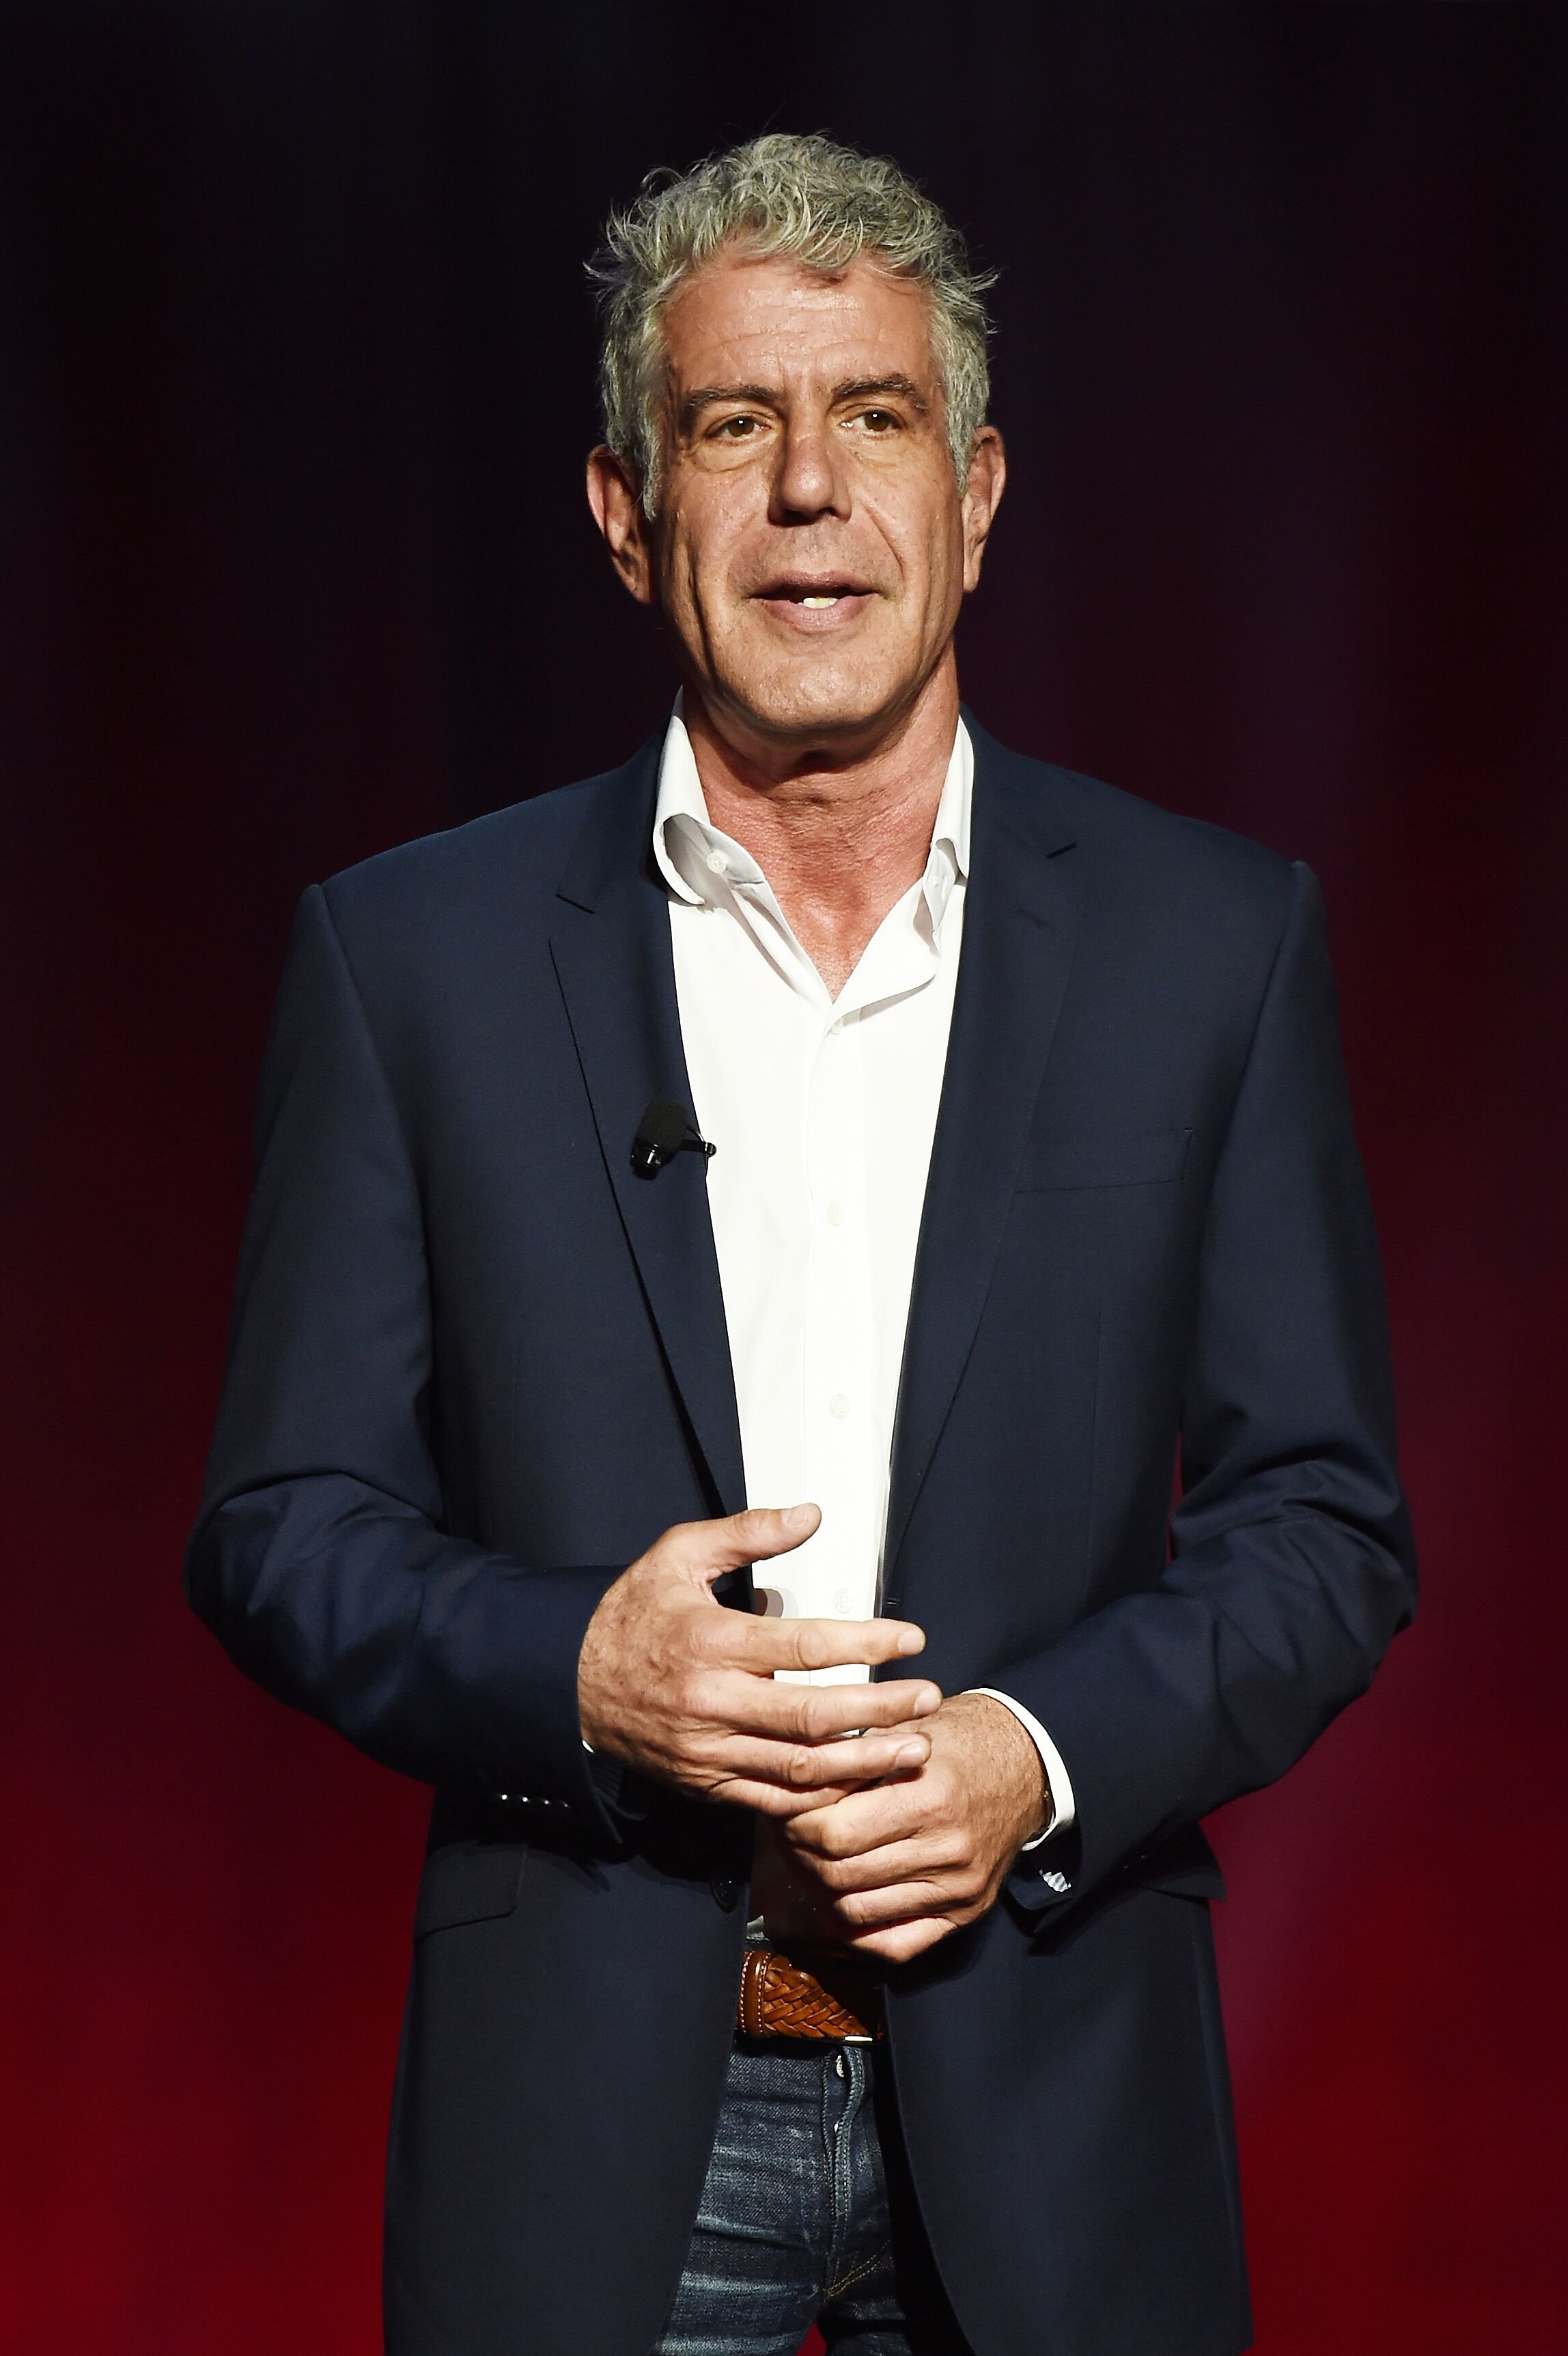 Chef Anthony Bourdain speaks on stage during the Turner Upfront 2016 show at The Theater at Madison Square Garden on May 18, 2016 in New York City | Photo: Getty Images